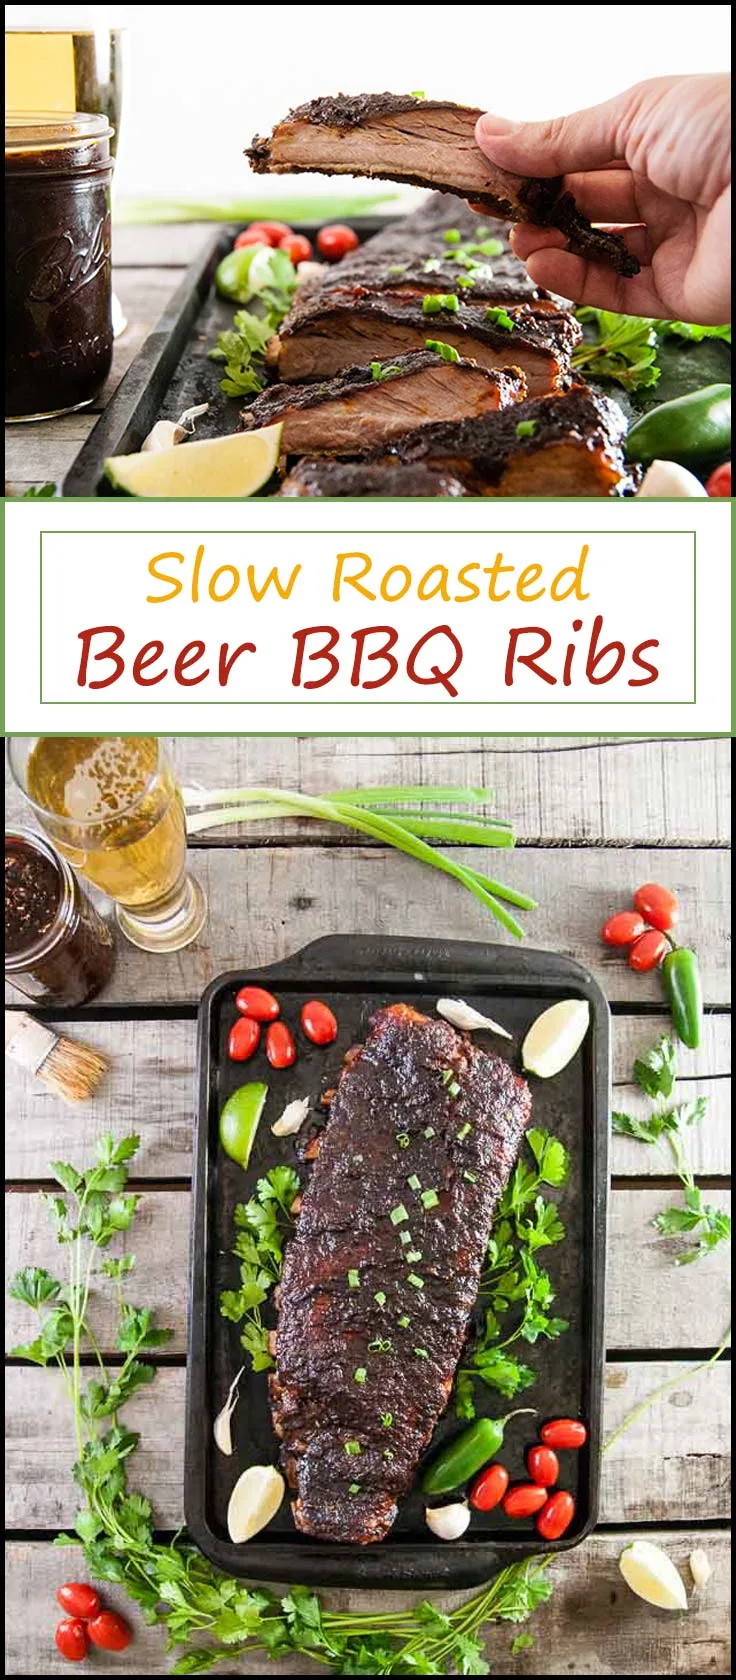 Slow Roasted Beer Barbecue Ribs are the perfect summer barbecue recipe when you don't feel like grilling from www.seasonedsprinkles.com